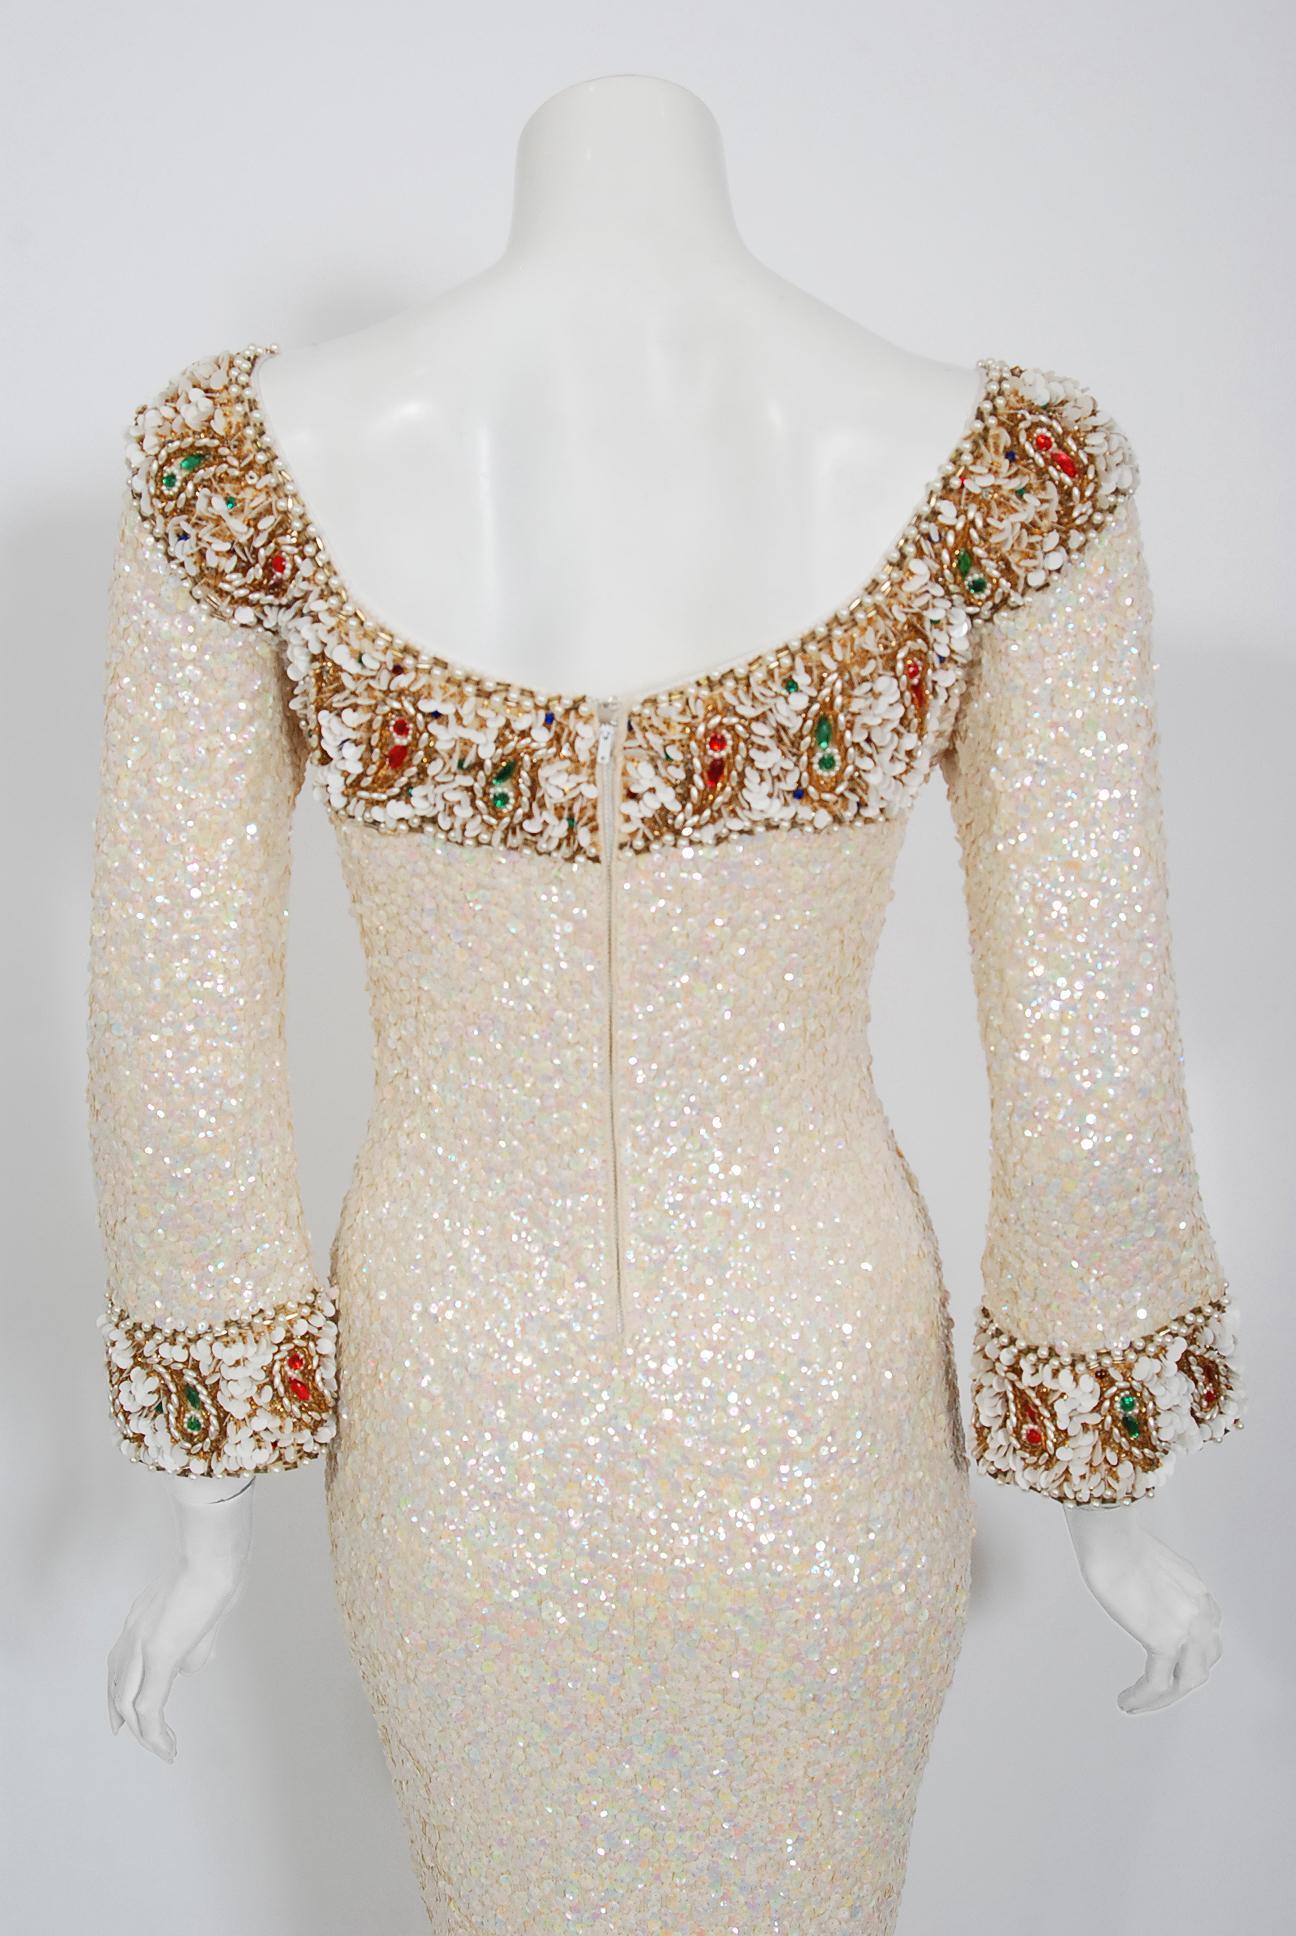 1960's Gene Shelly Ivory Creme Beaded Sequin Wool Knit Scoopneck Hourglass Gown 1